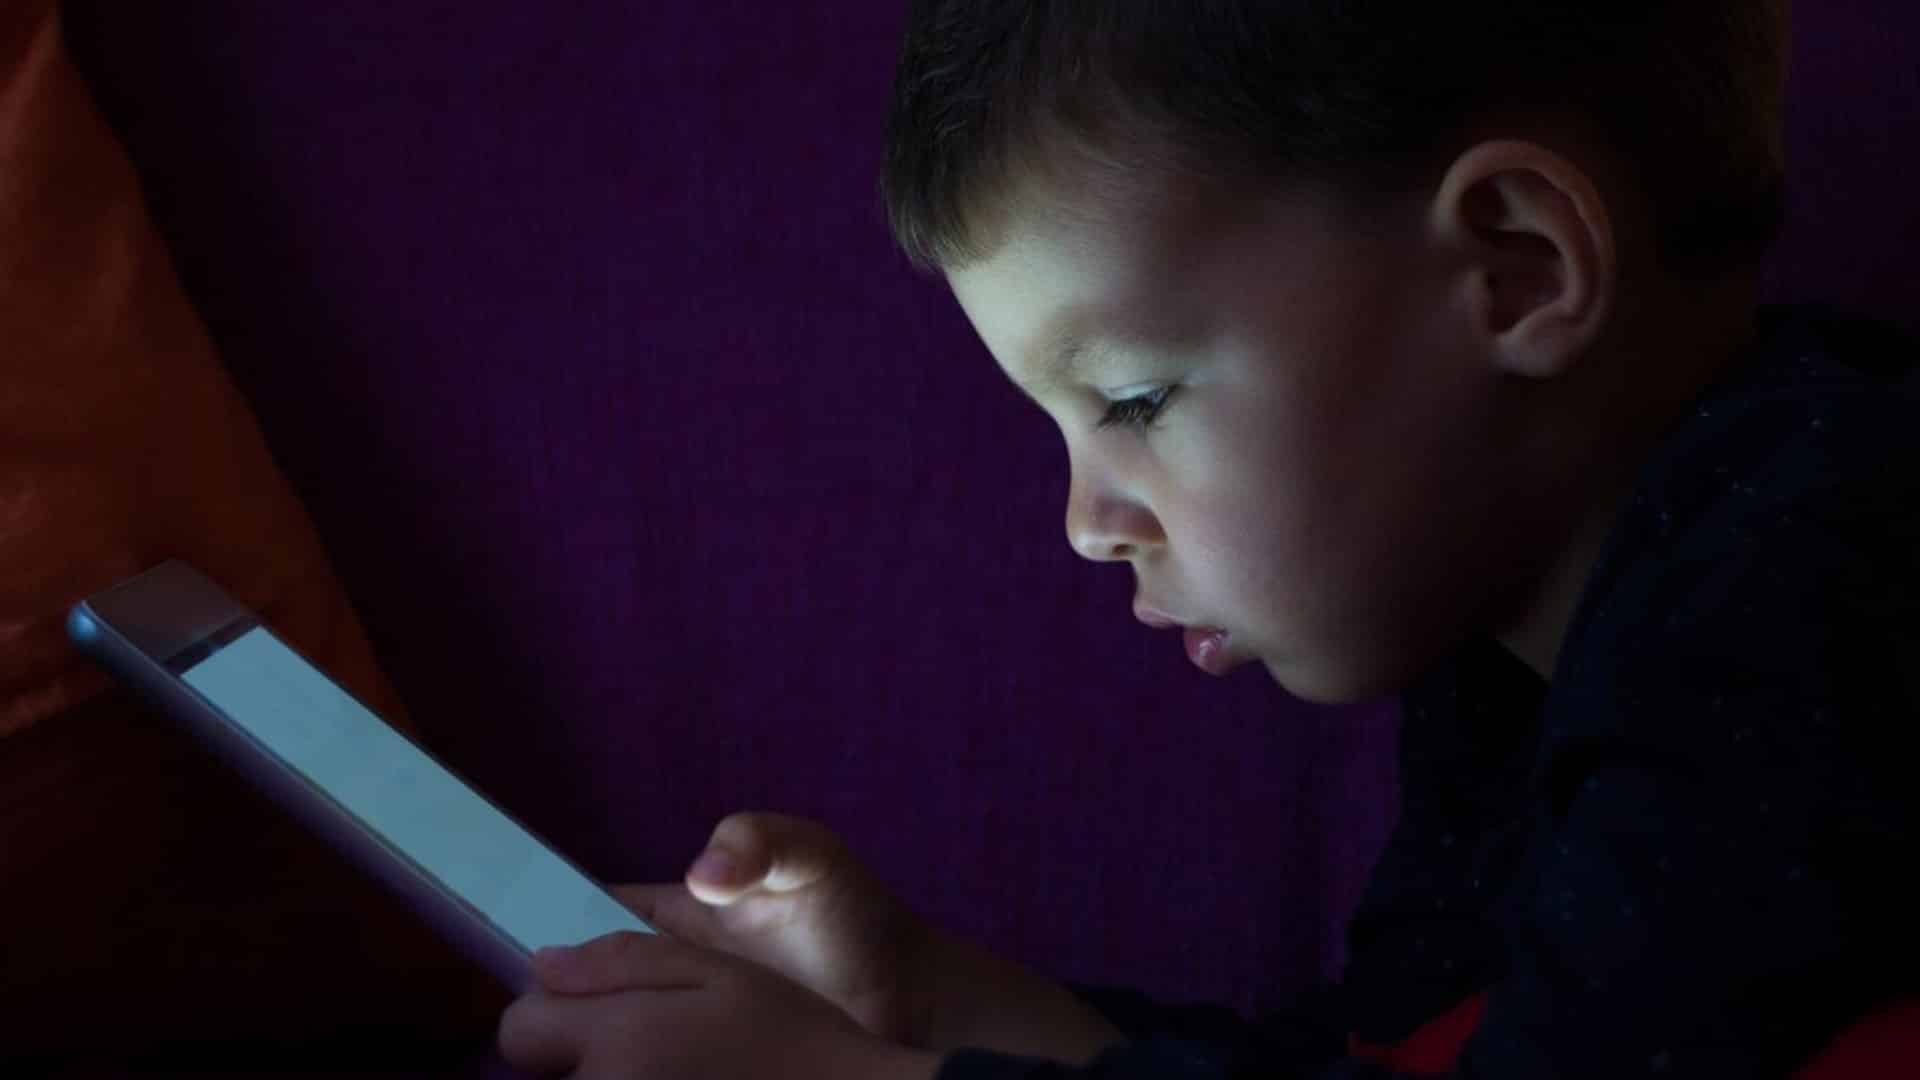 85 pc Indian parents worry about kids spending excessive screen time during summer vacations: Survey